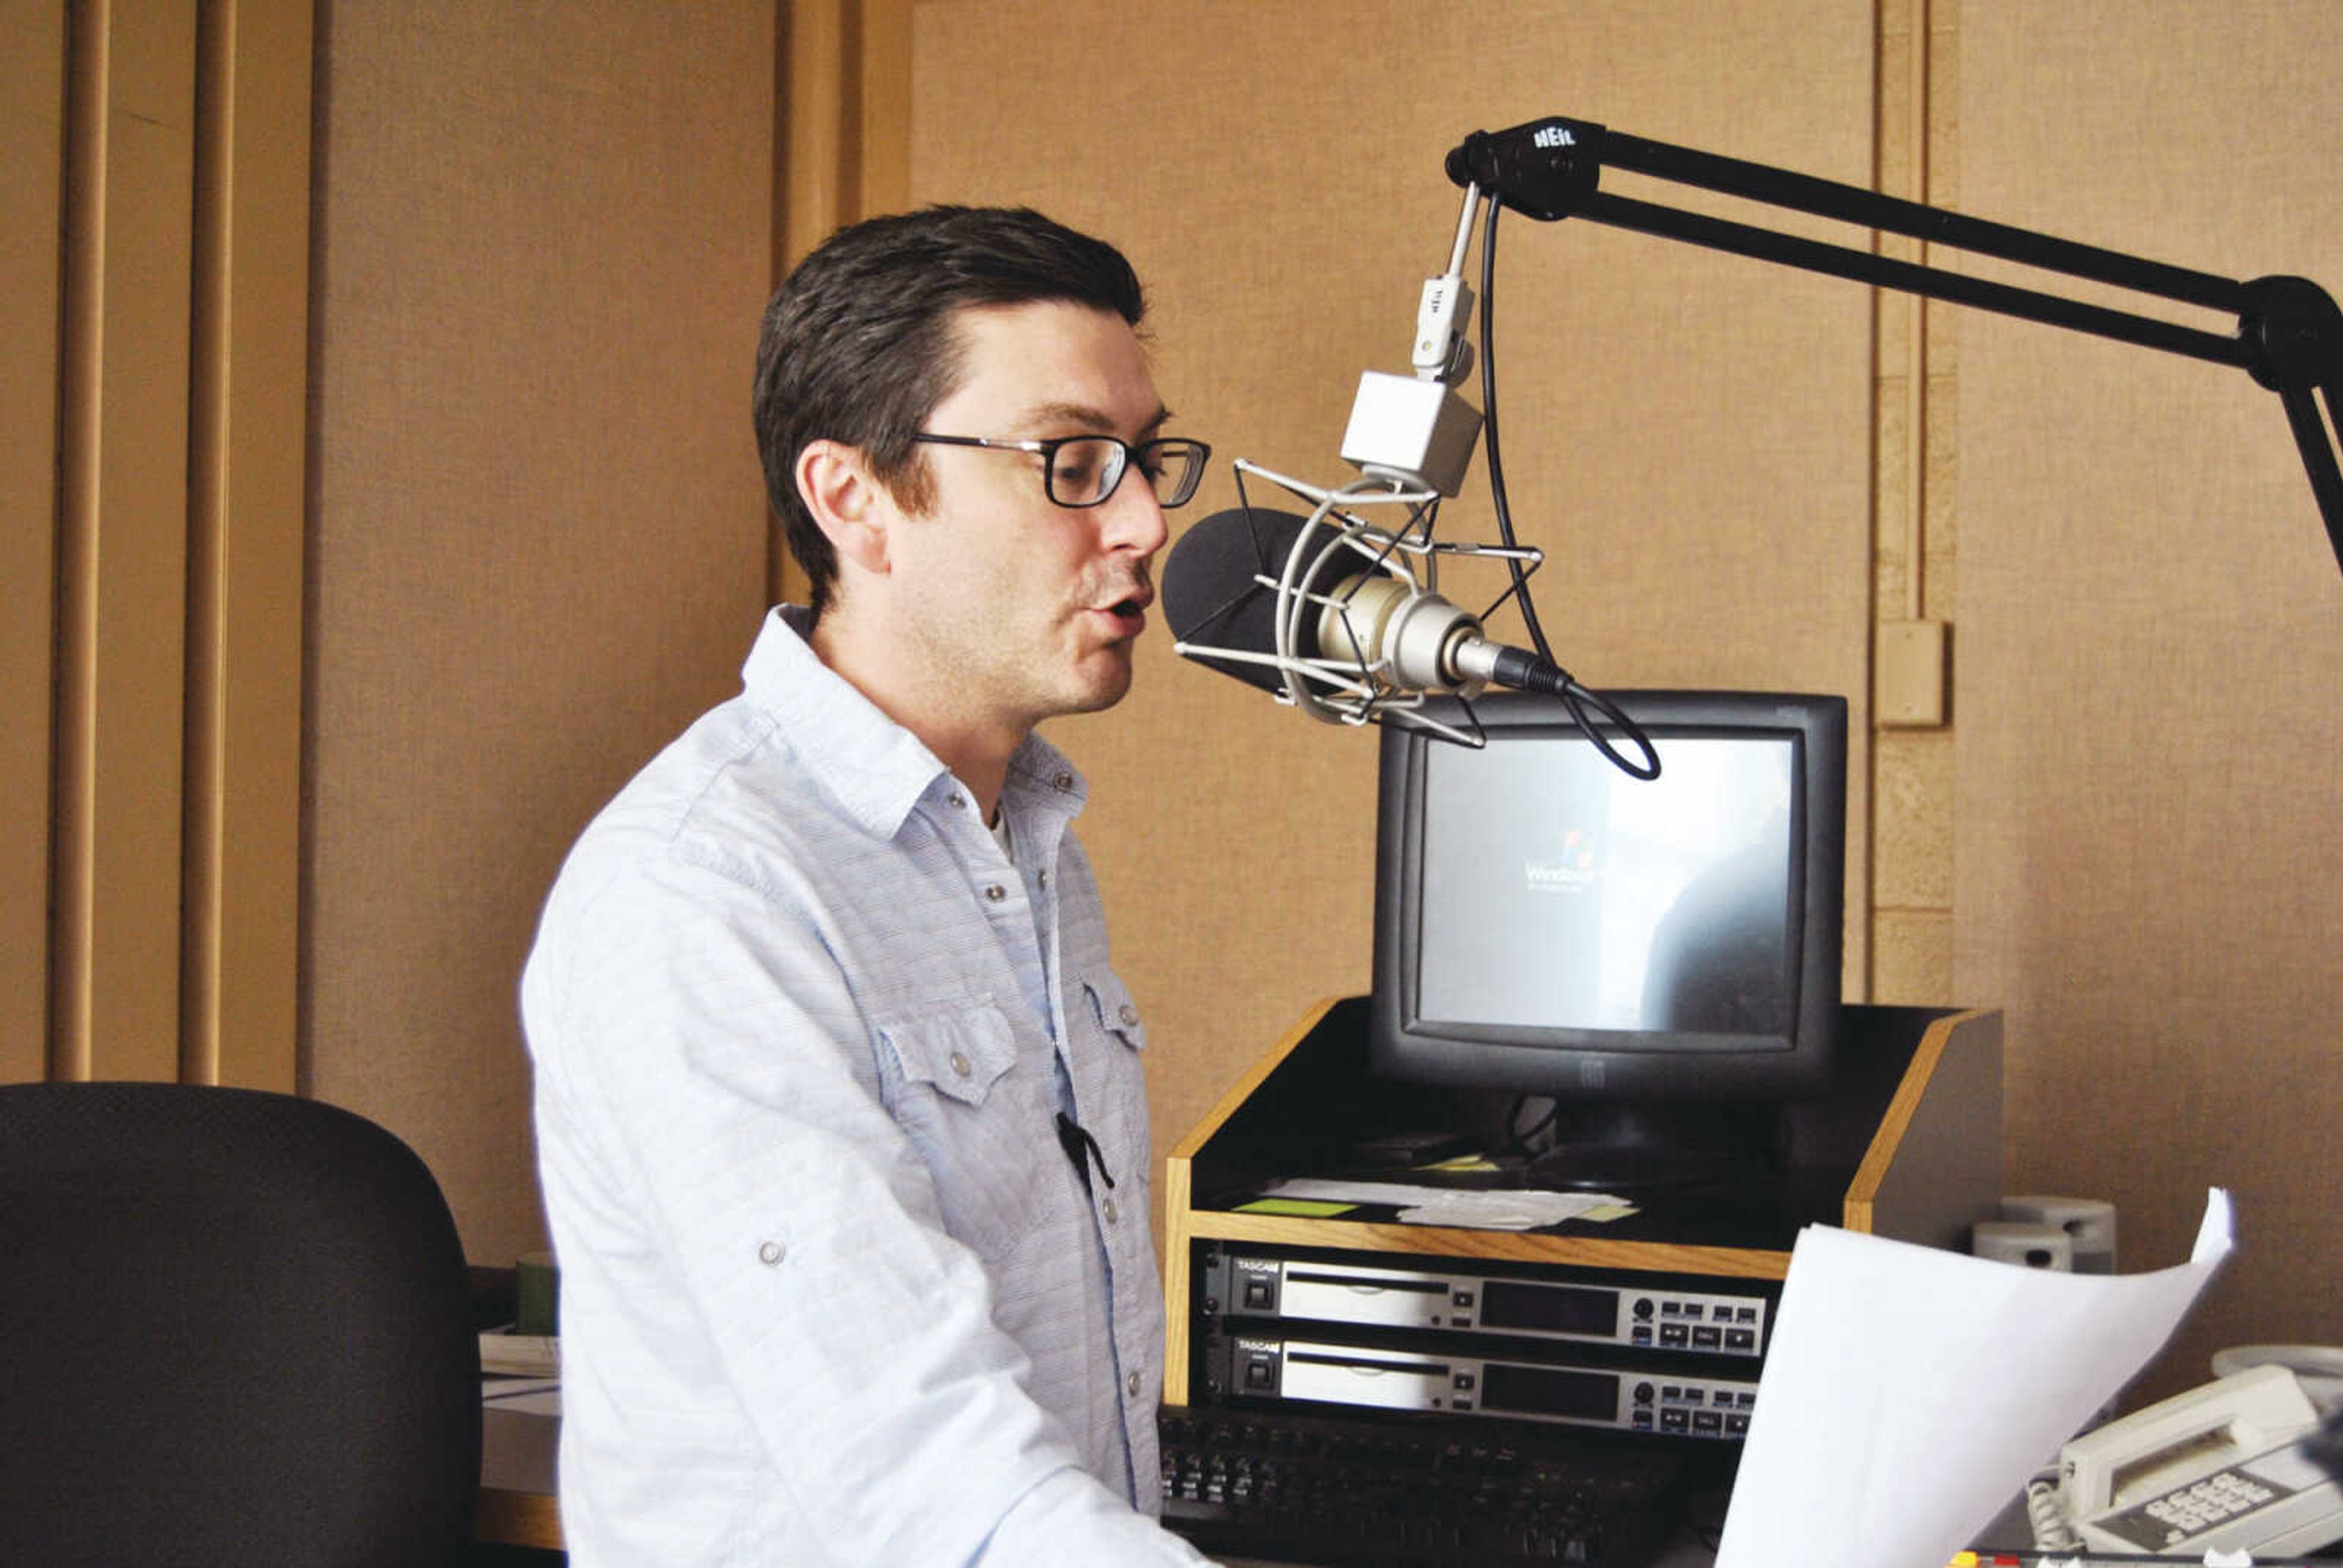 KRCU host and news producer Jacob McCleland in the studio. Photo by J.C. Reeves